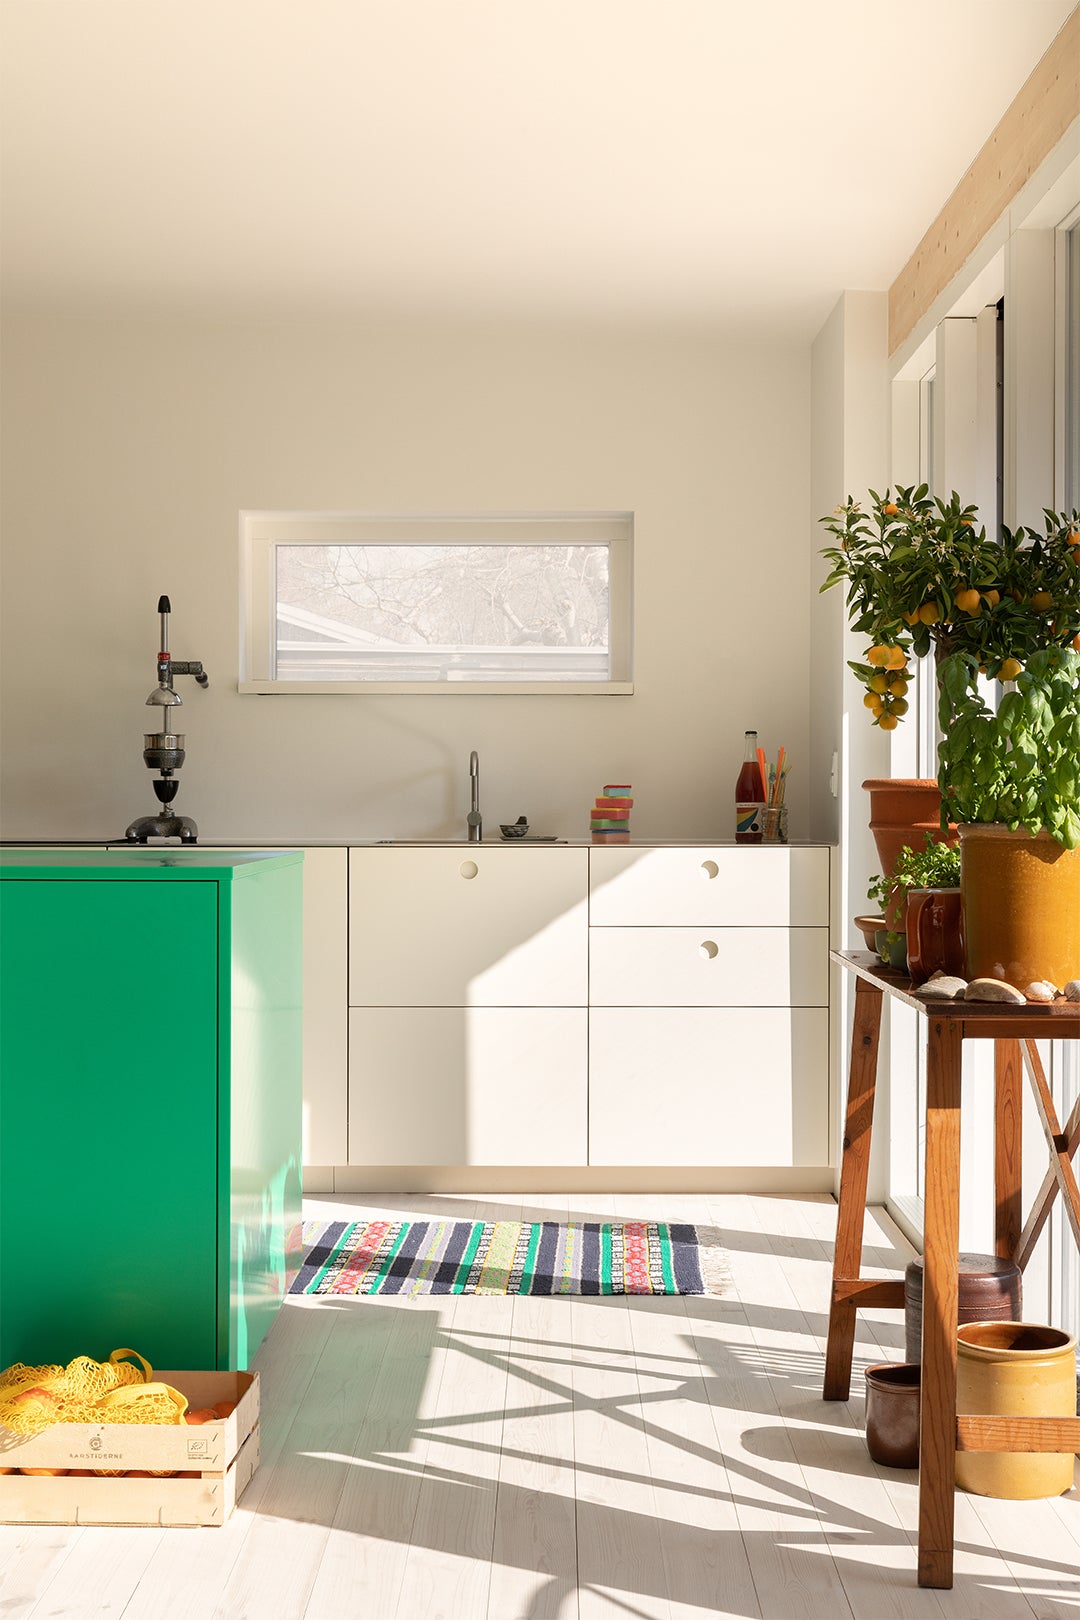 The Kelly Green Island in This Danish Kitchen Is Made From the Same Material as Cutting Boards